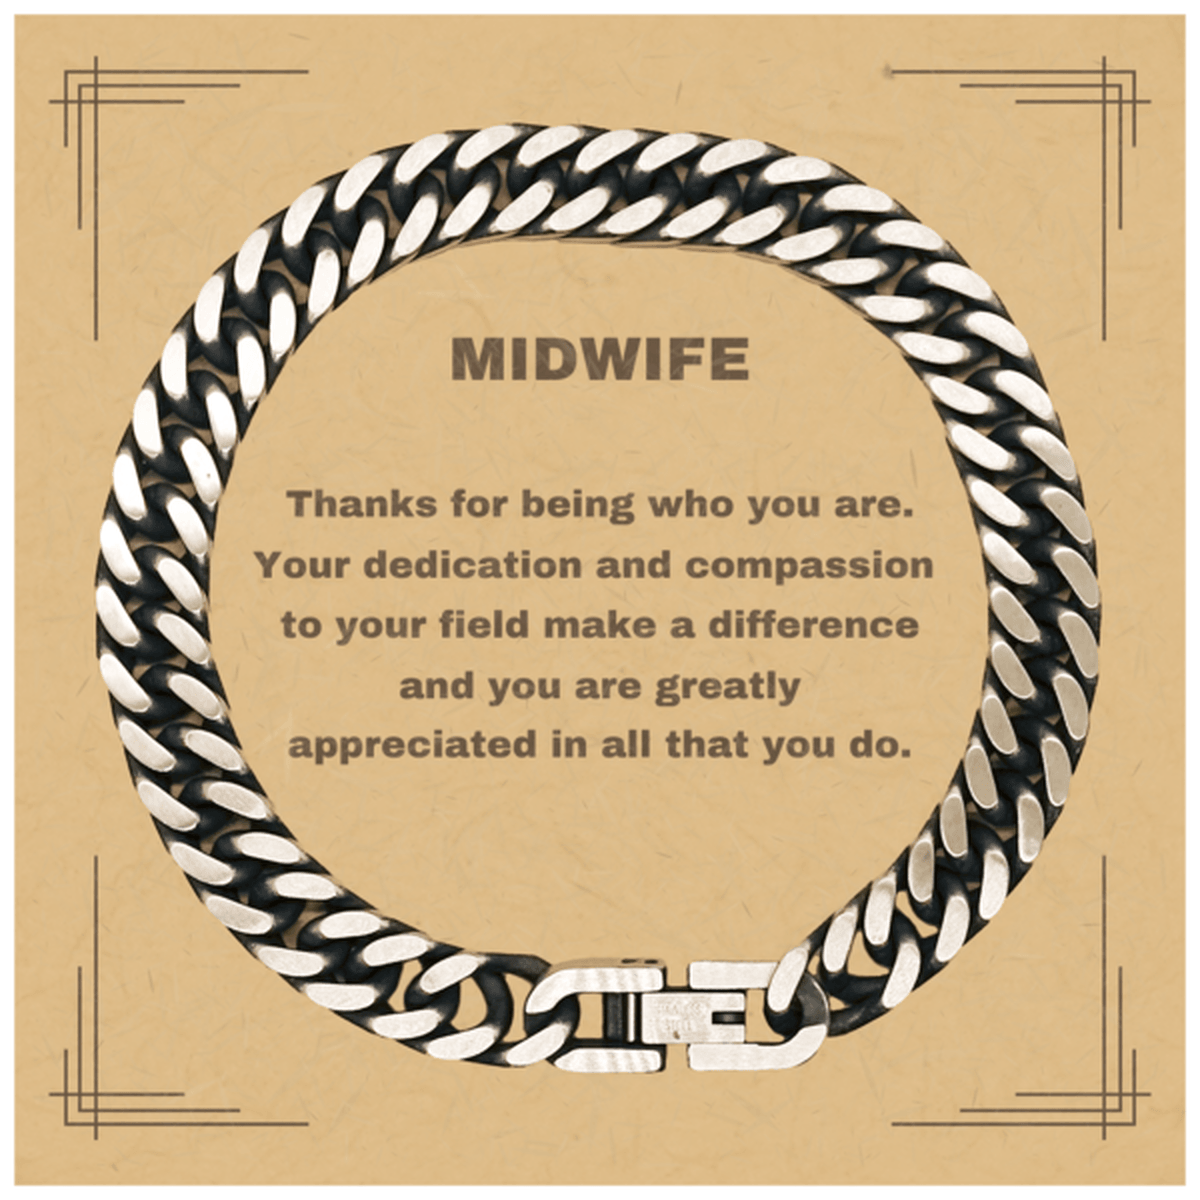 MidwifeCuban Chain Link Bracelet - Thanks for being who you are - Birthday Christmas Jewelry Gifts Coworkers Colleague Boss - Mallard Moon Gift Shop